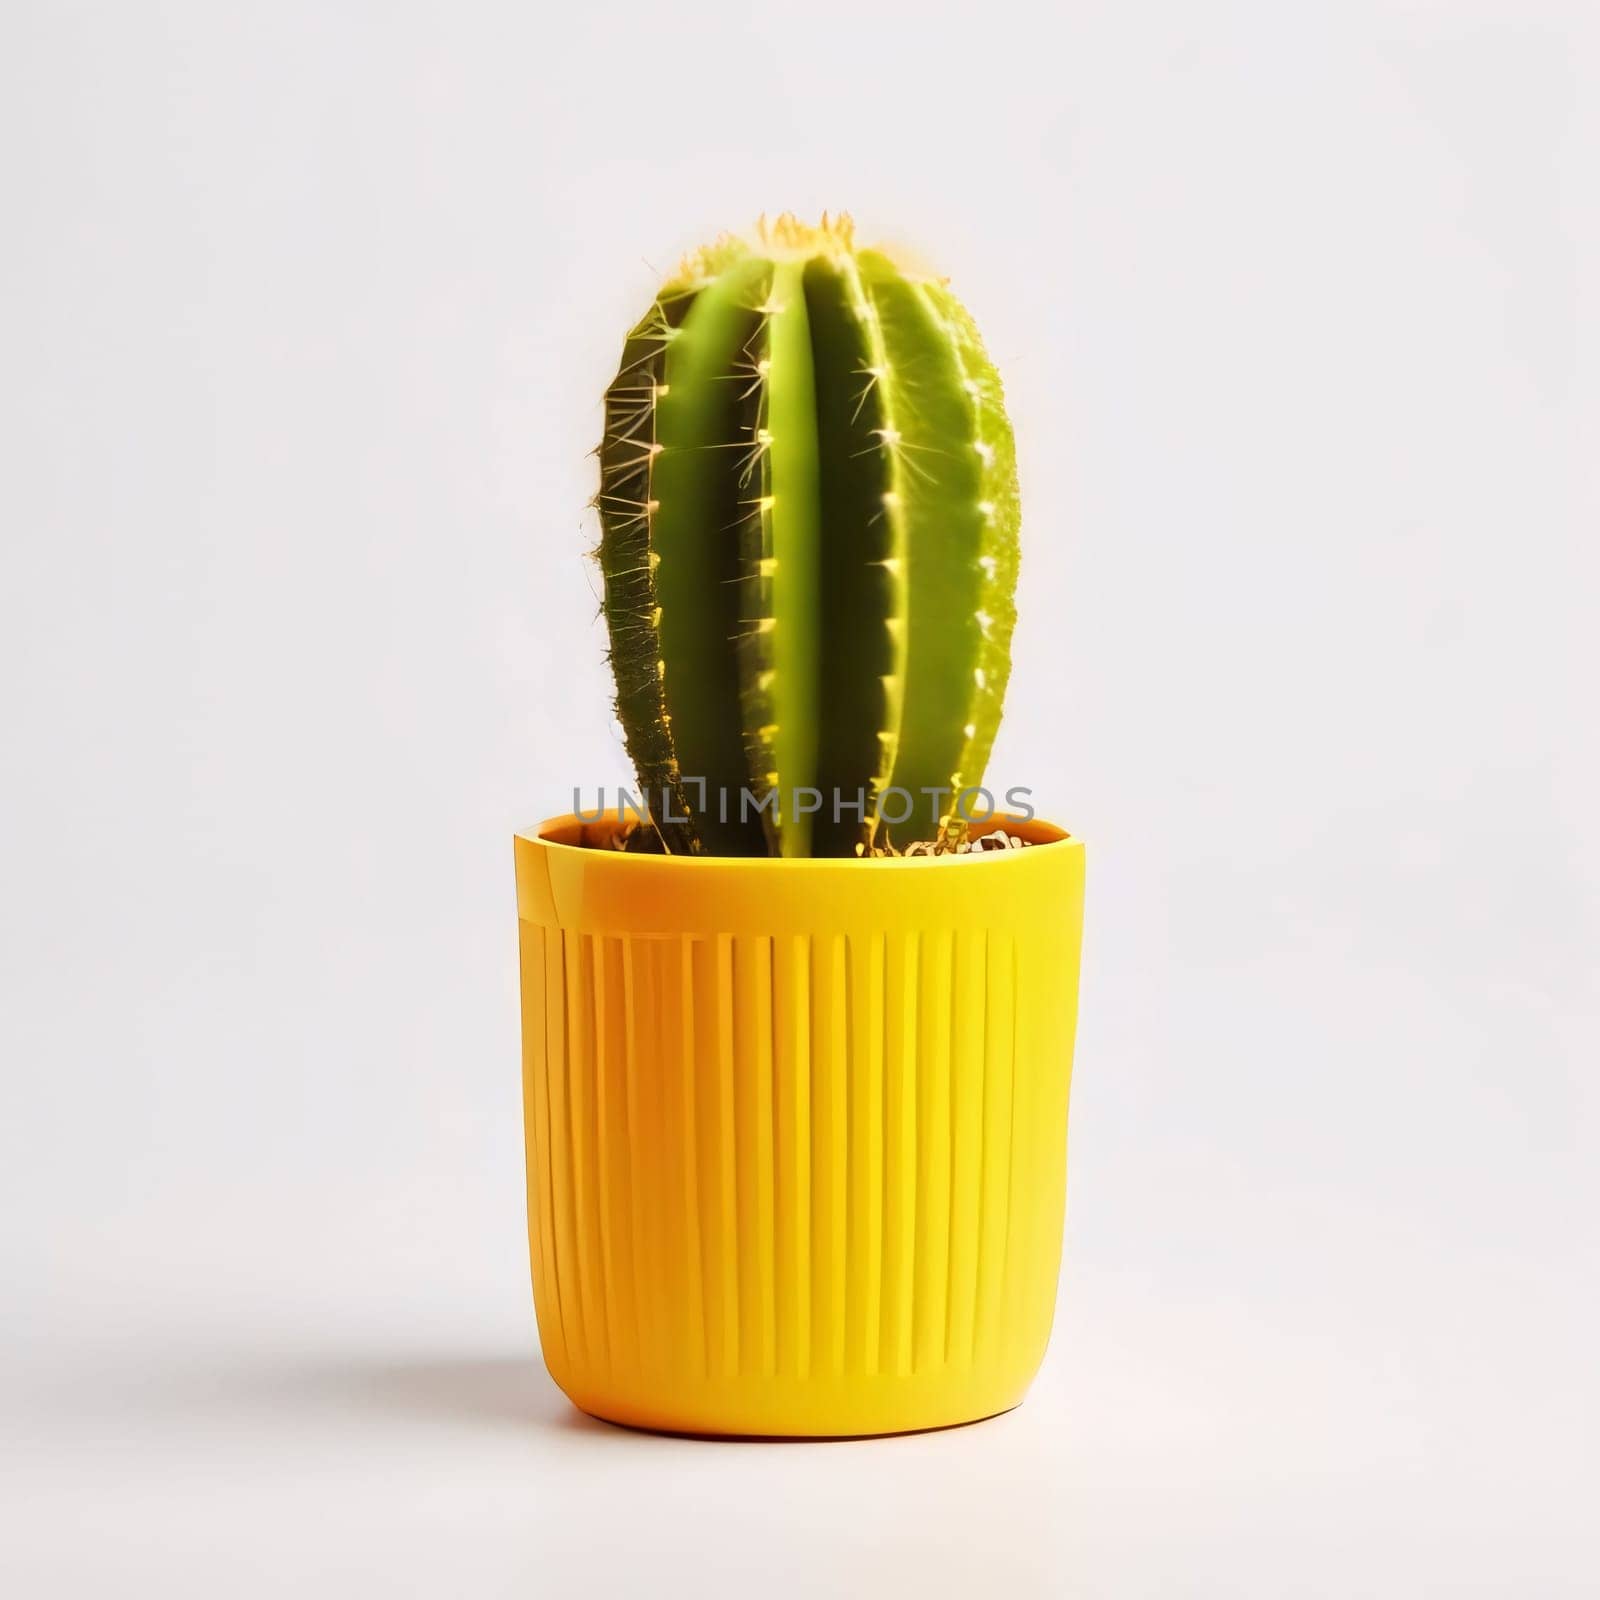 Plant called Cactus: Cactus in yellow pot on white background. Minimal style.